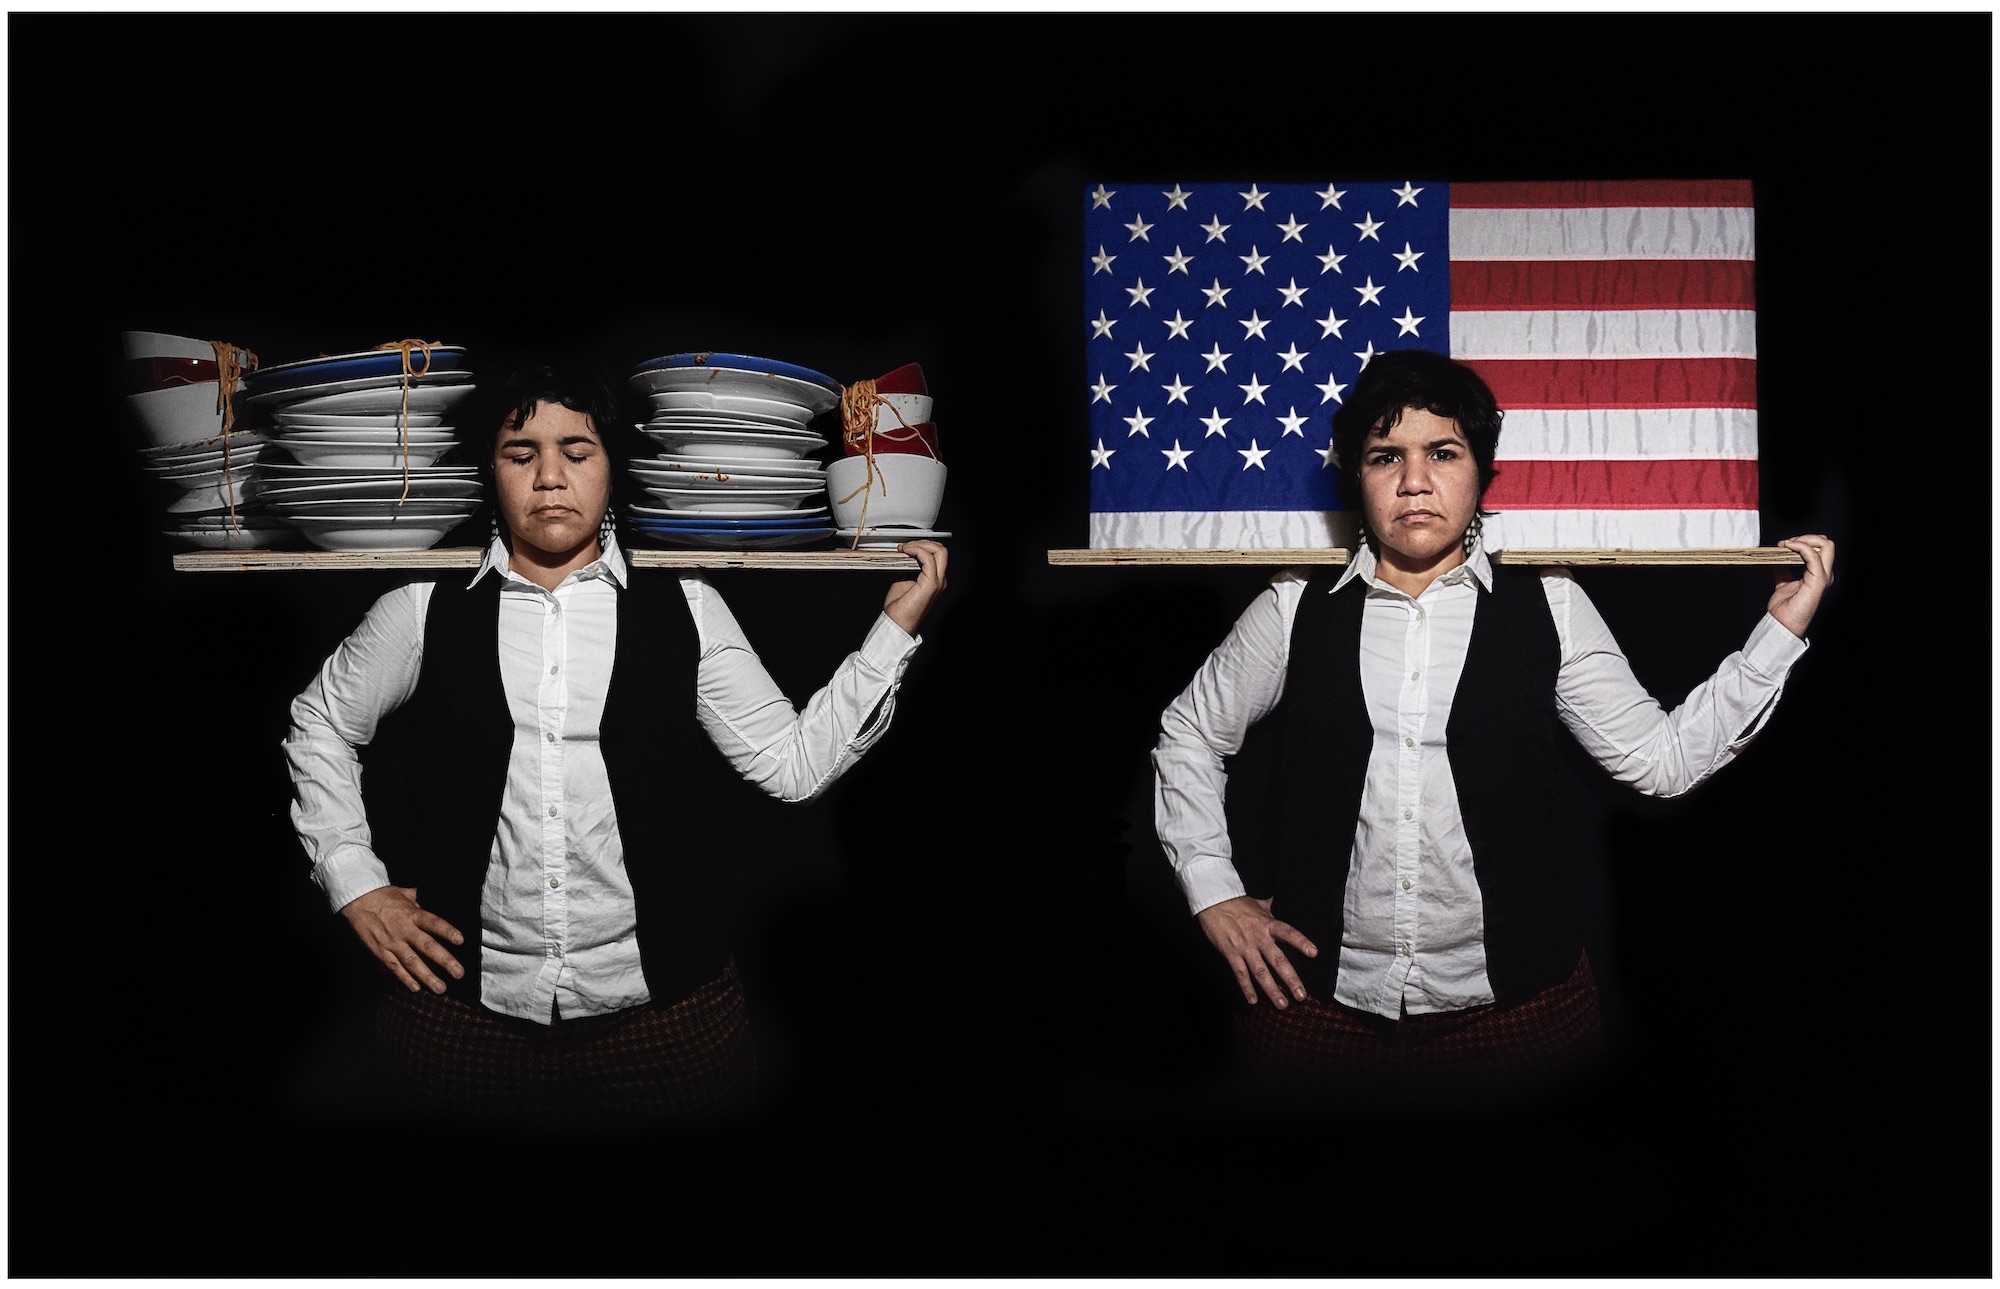 The same person poses twice in an image. In the first position, she has her eyes closed and holds a shelf of dirty dishes on her shoulders. The second is the US flag on a shelf on her shoulders. The person wears a black waistcoat over a white shirt..